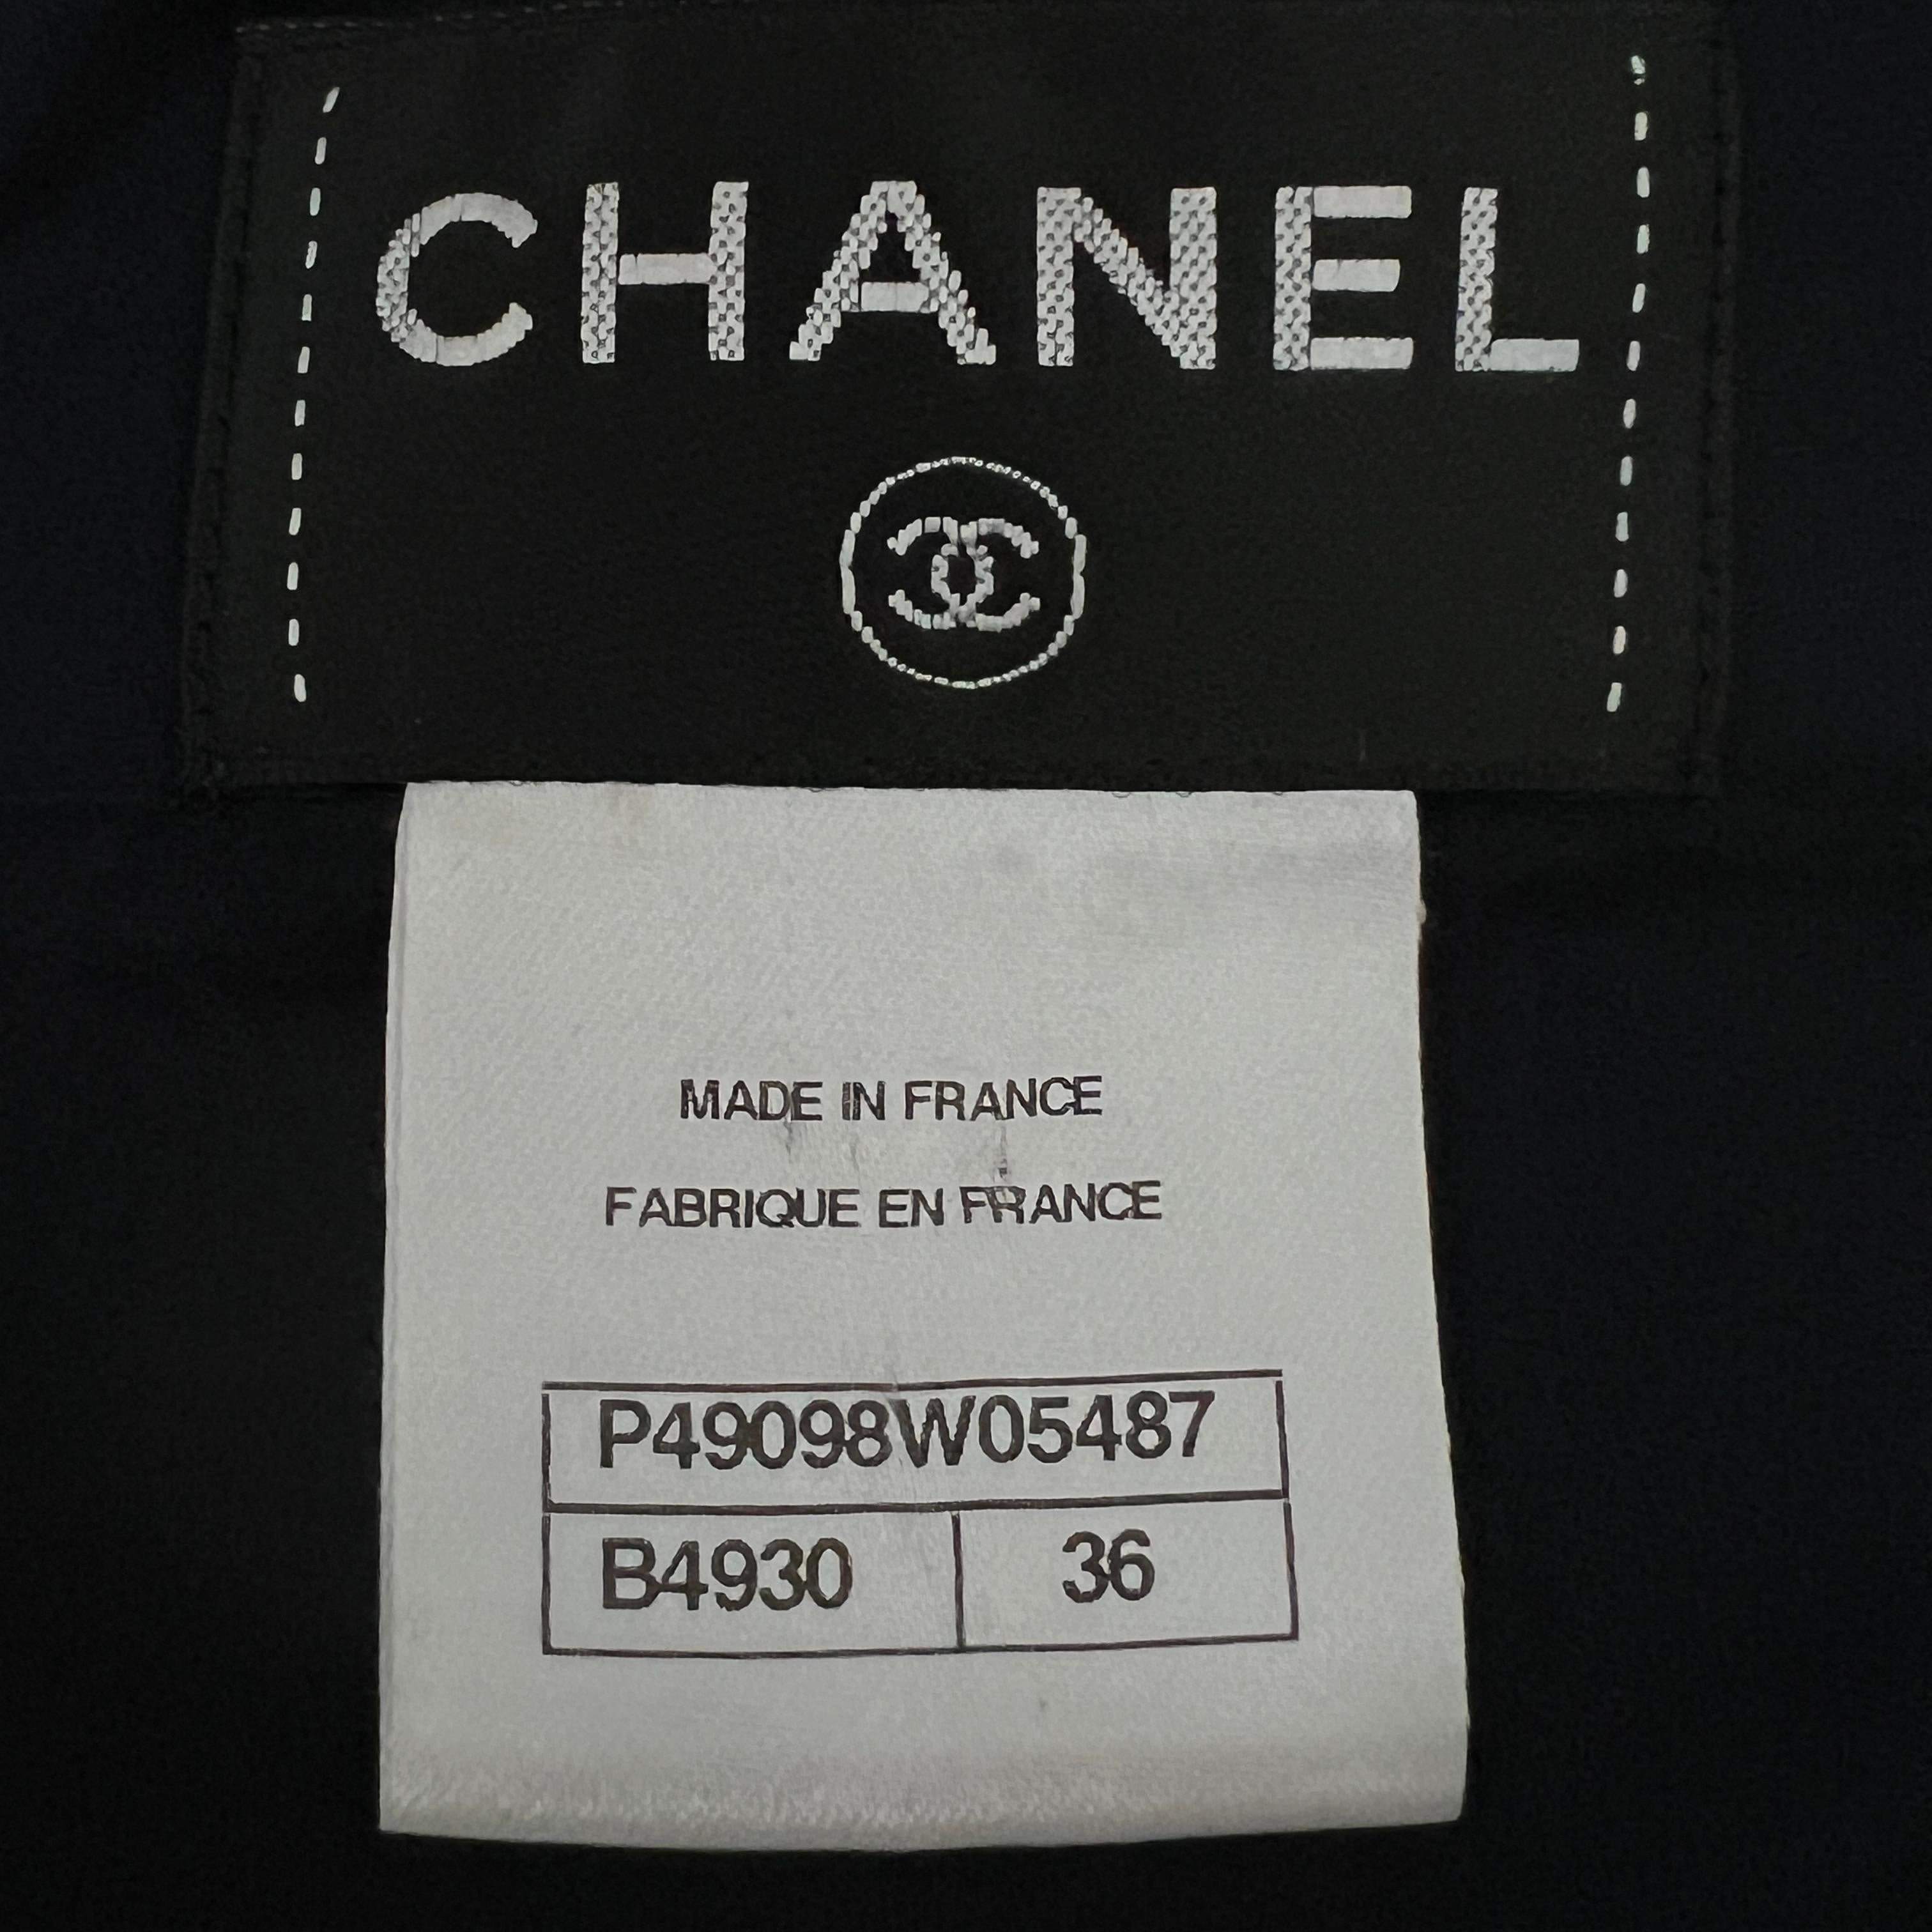 Chanel Graffiti Collection Tweed Dress For Sale 5